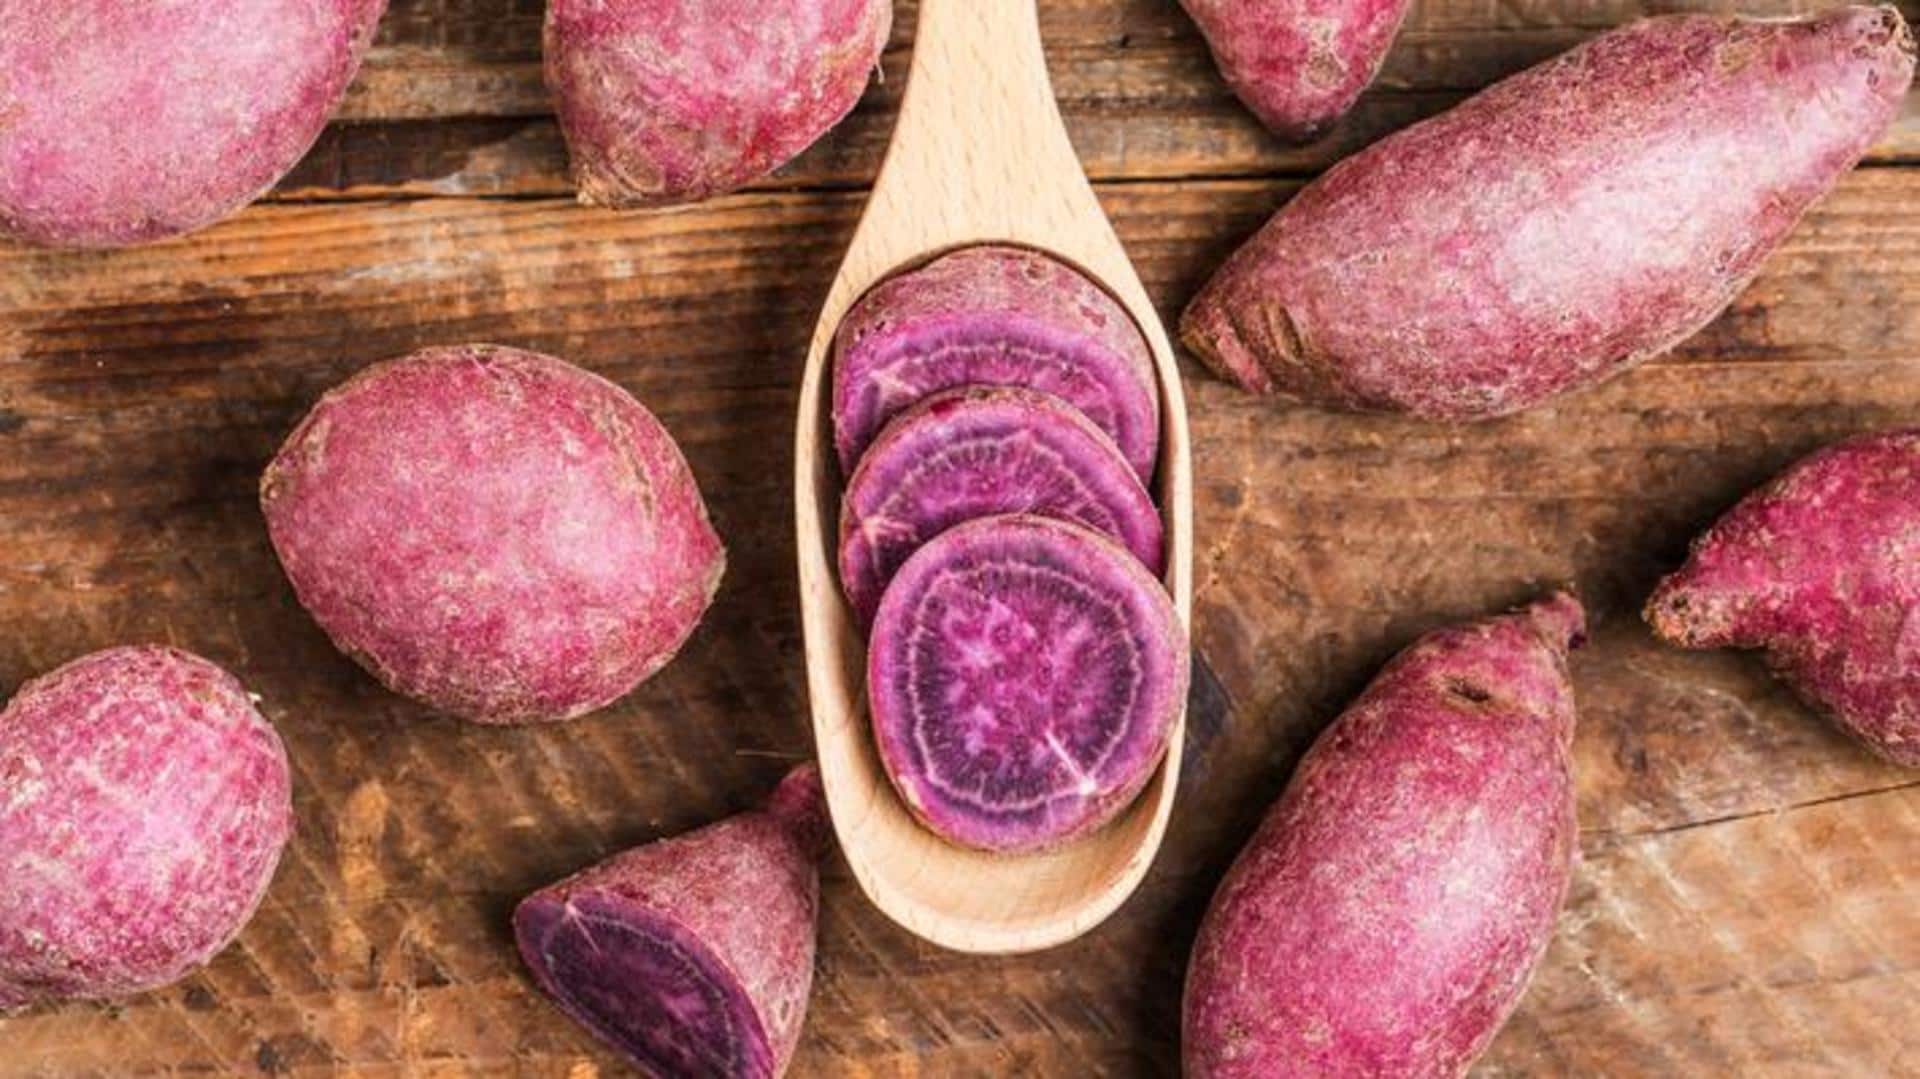 National Cook a Sweet Potato Day: 5 recipes to try